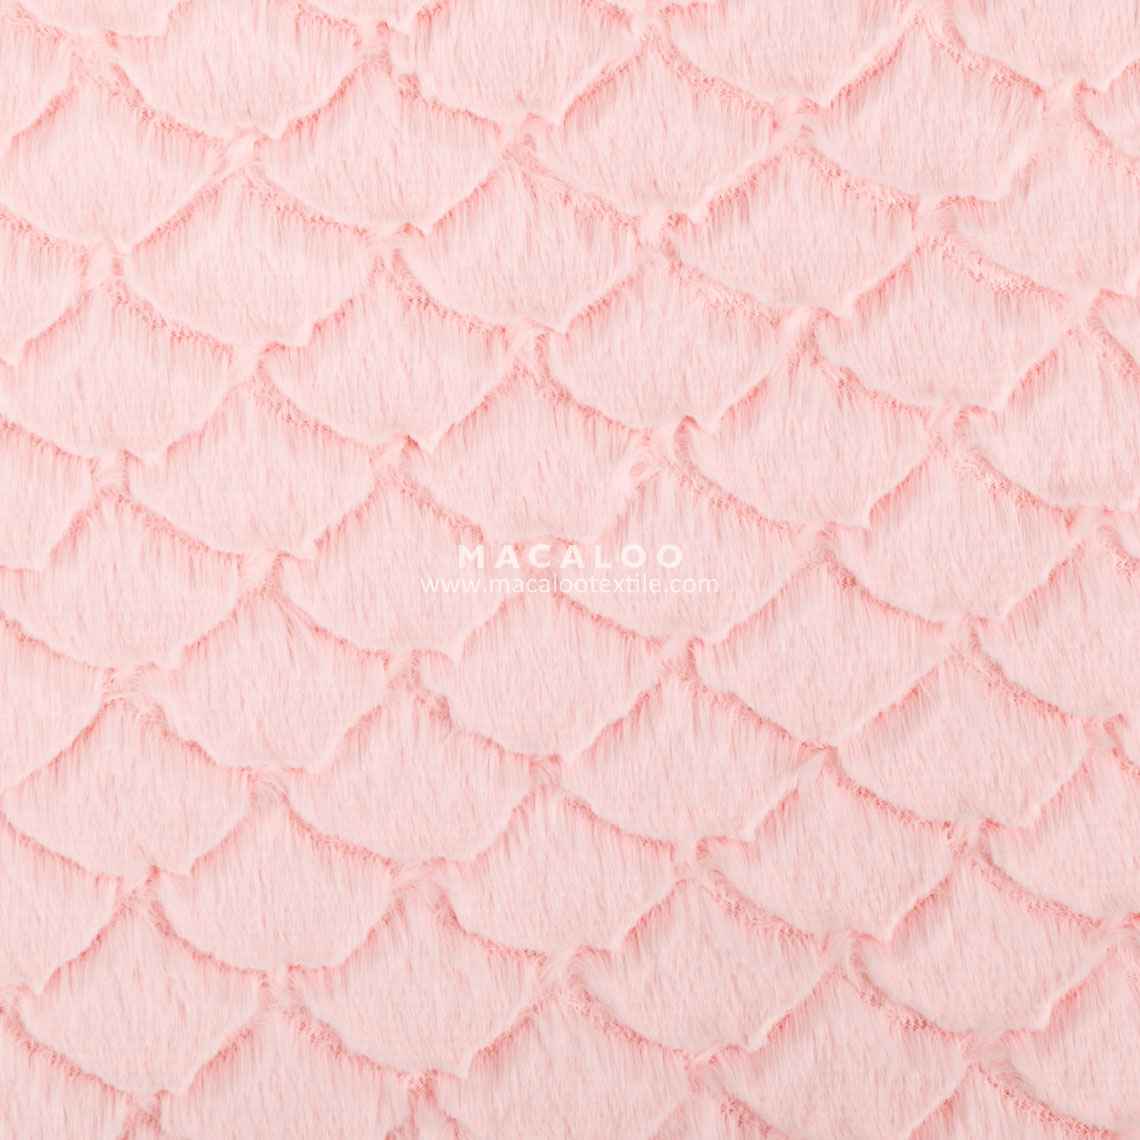 China supplier polyester minky fabric for cuddle blanket